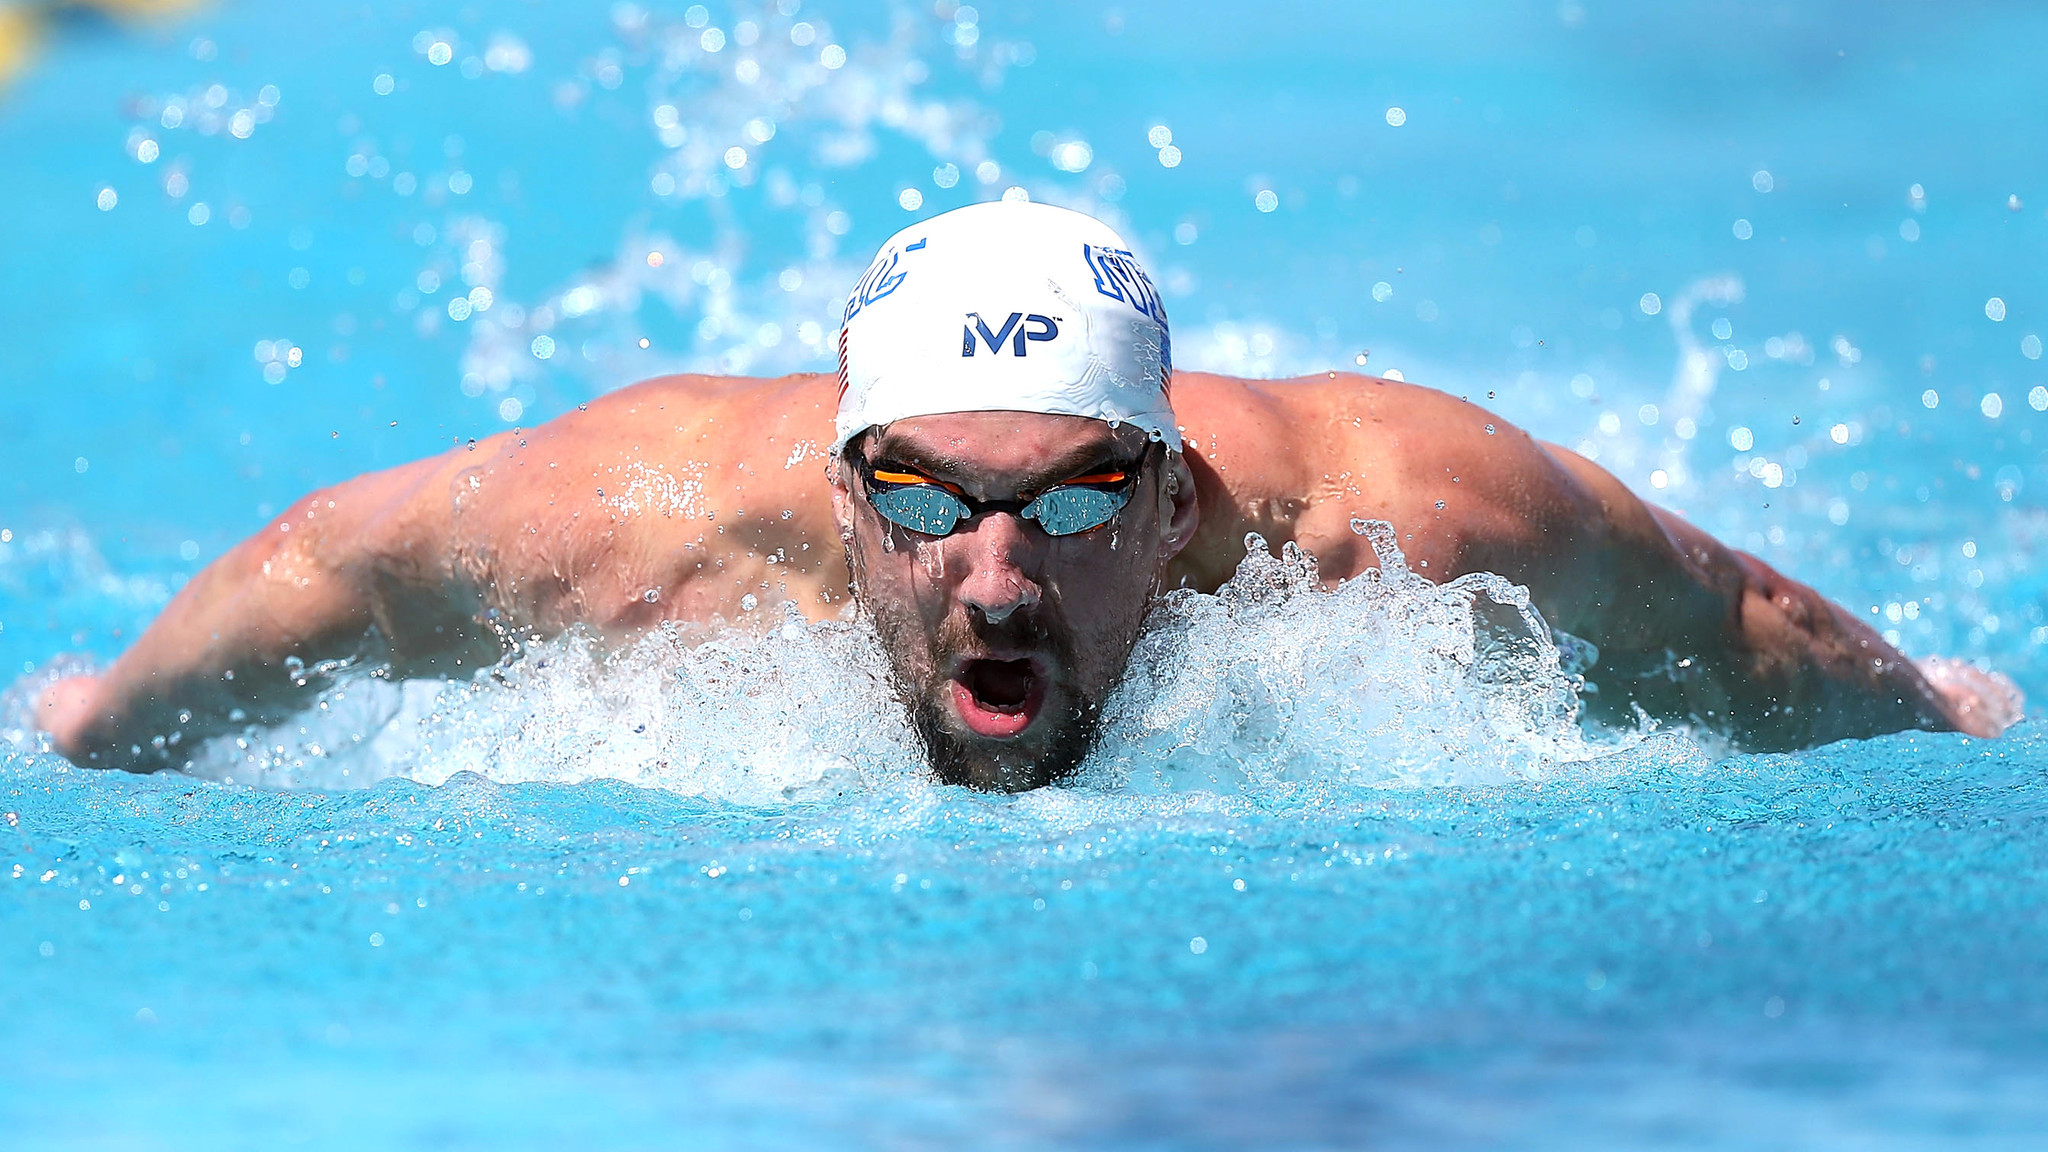 http://www.trbimg.com/img-5530f22f/turbine/bal-michael-phelps-posts-top-qualifying-time-in-100-meter-butterfly-20150416